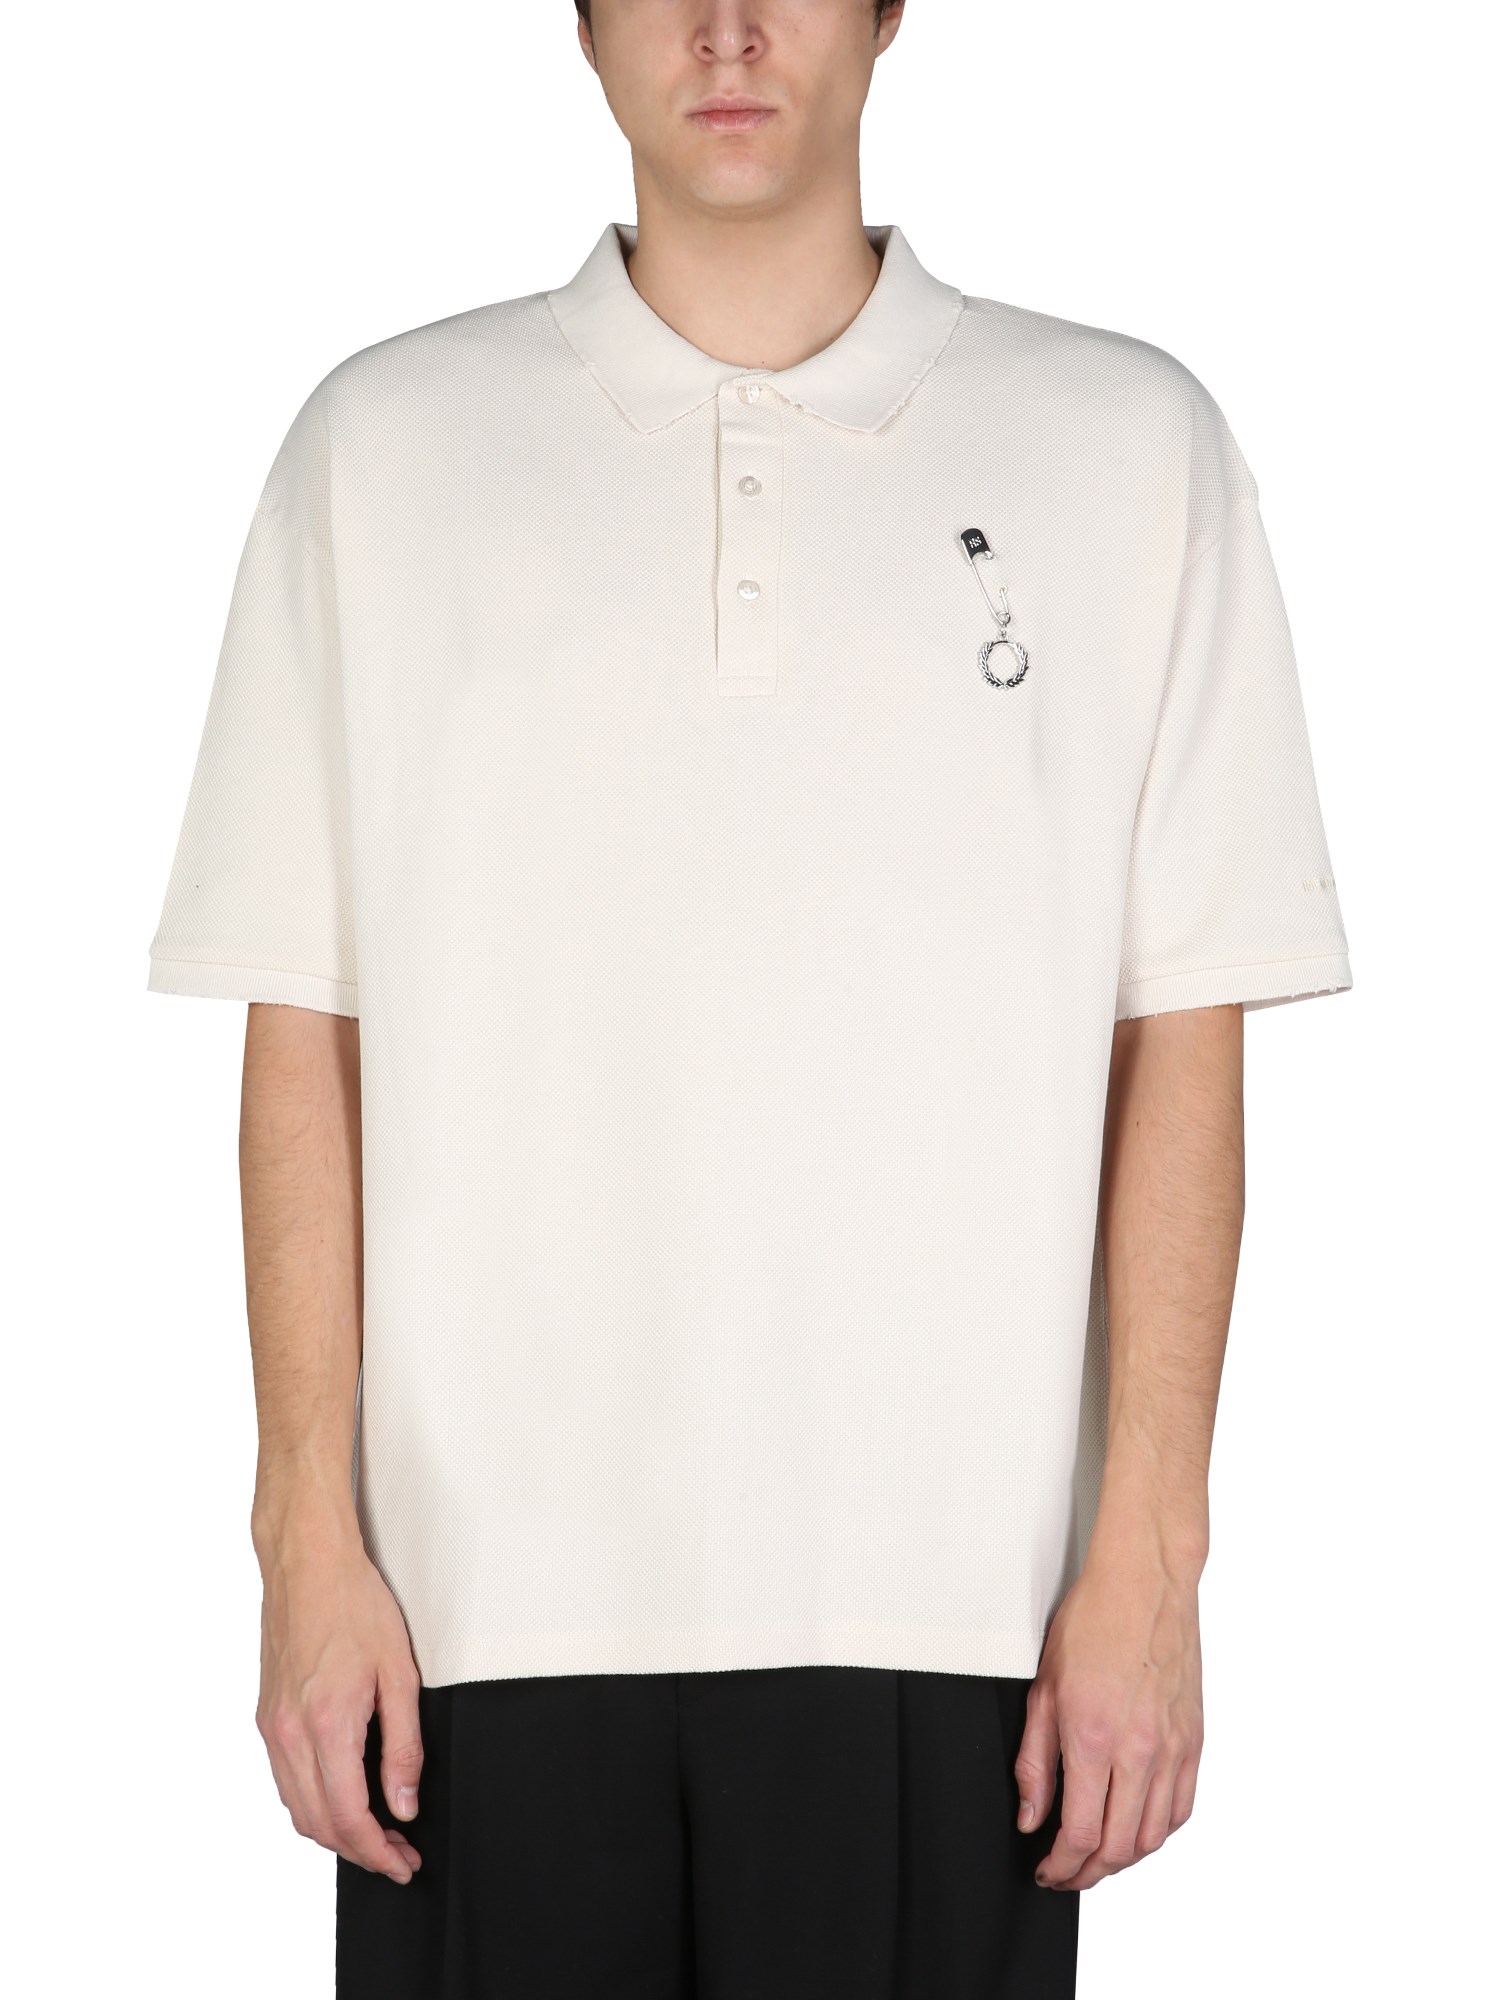 fred perry x raf simons distressed oversized polo shirt